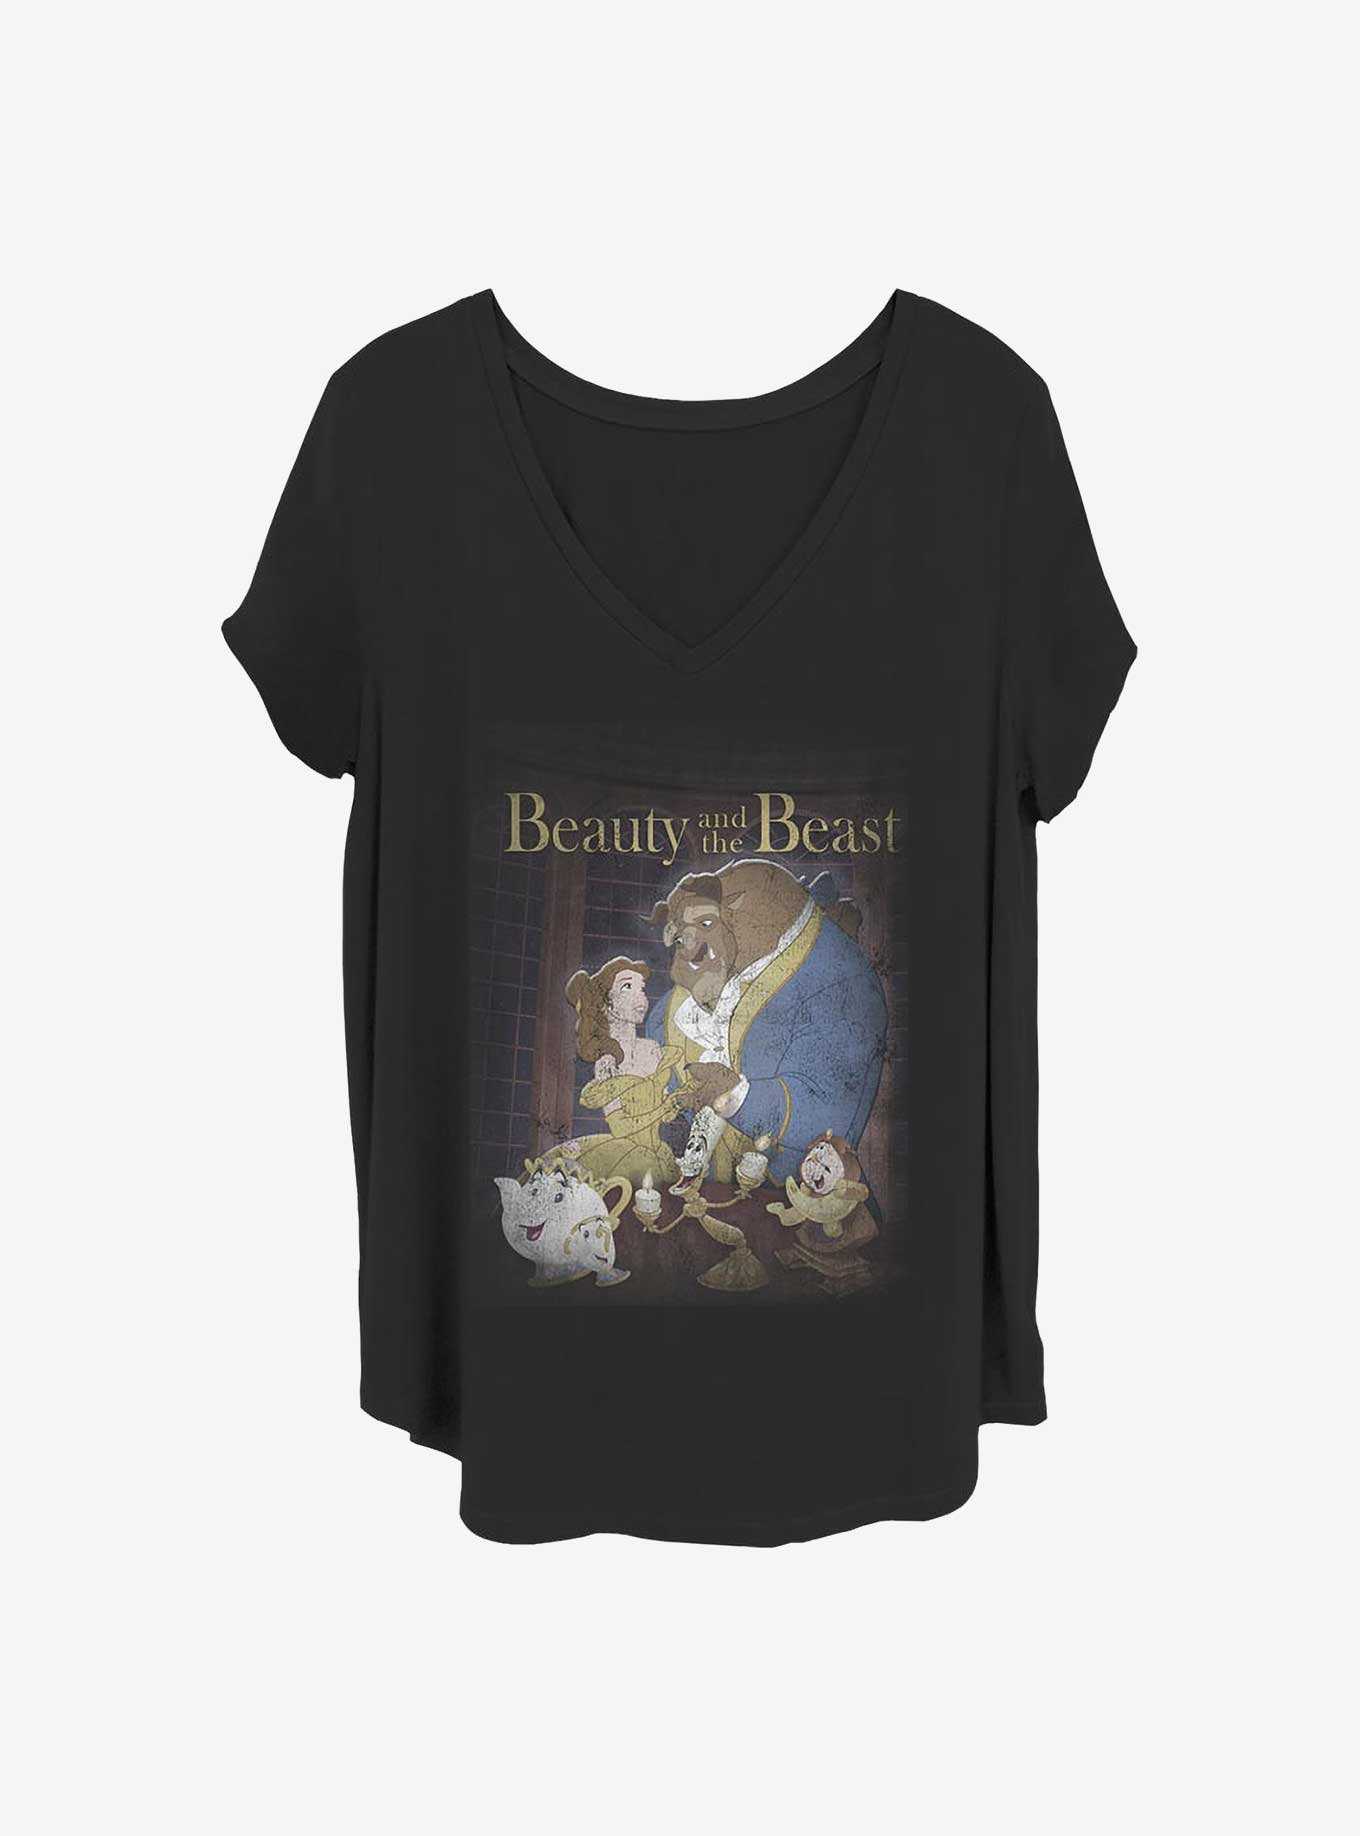 Disney Beauty and the Beast Poster Girls T-Shirt Plus Size, , hi-res